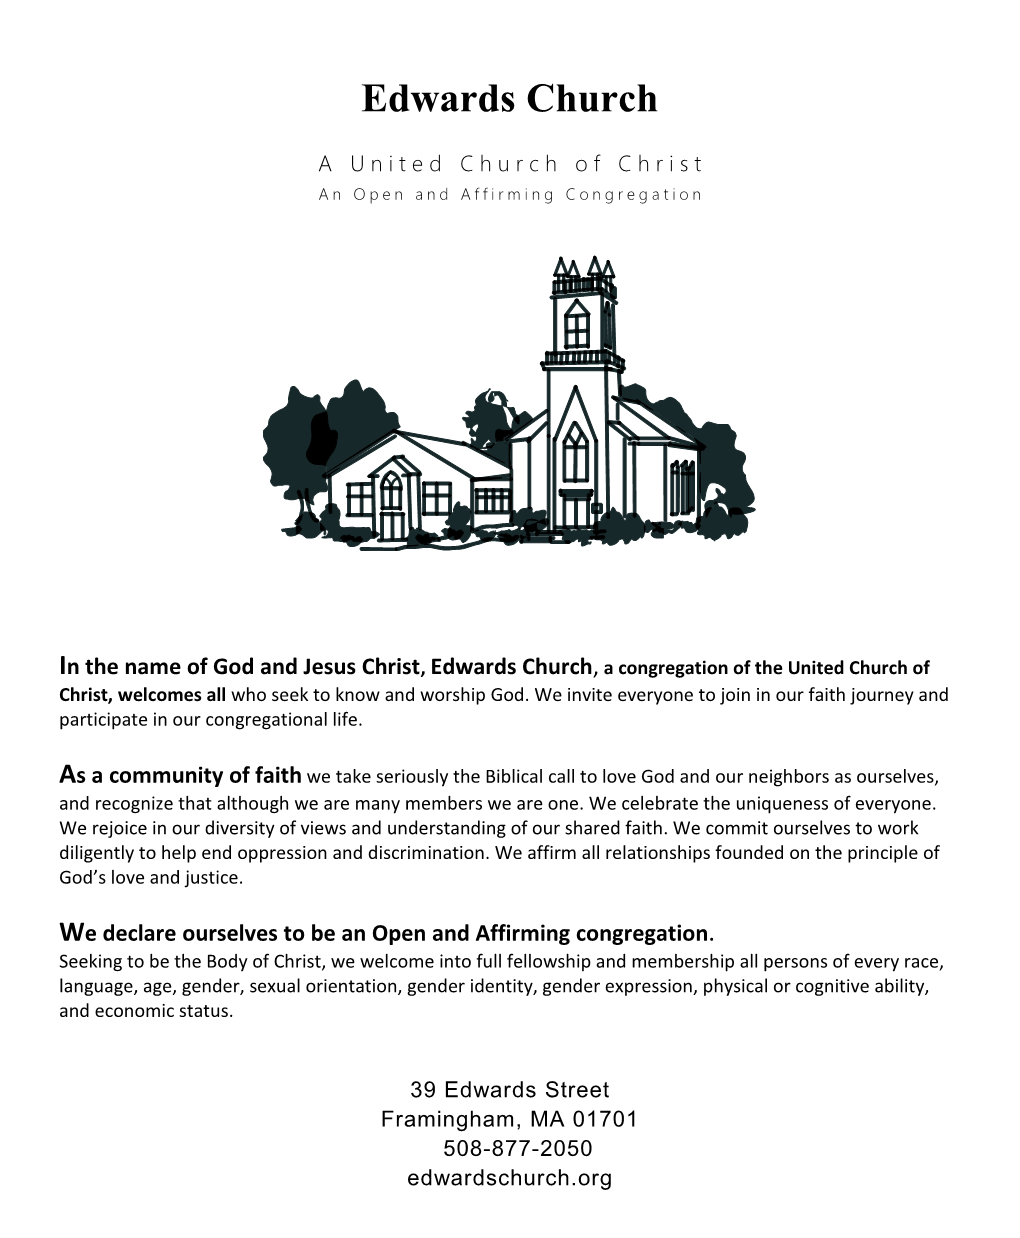 An Open and Affirming Congregation